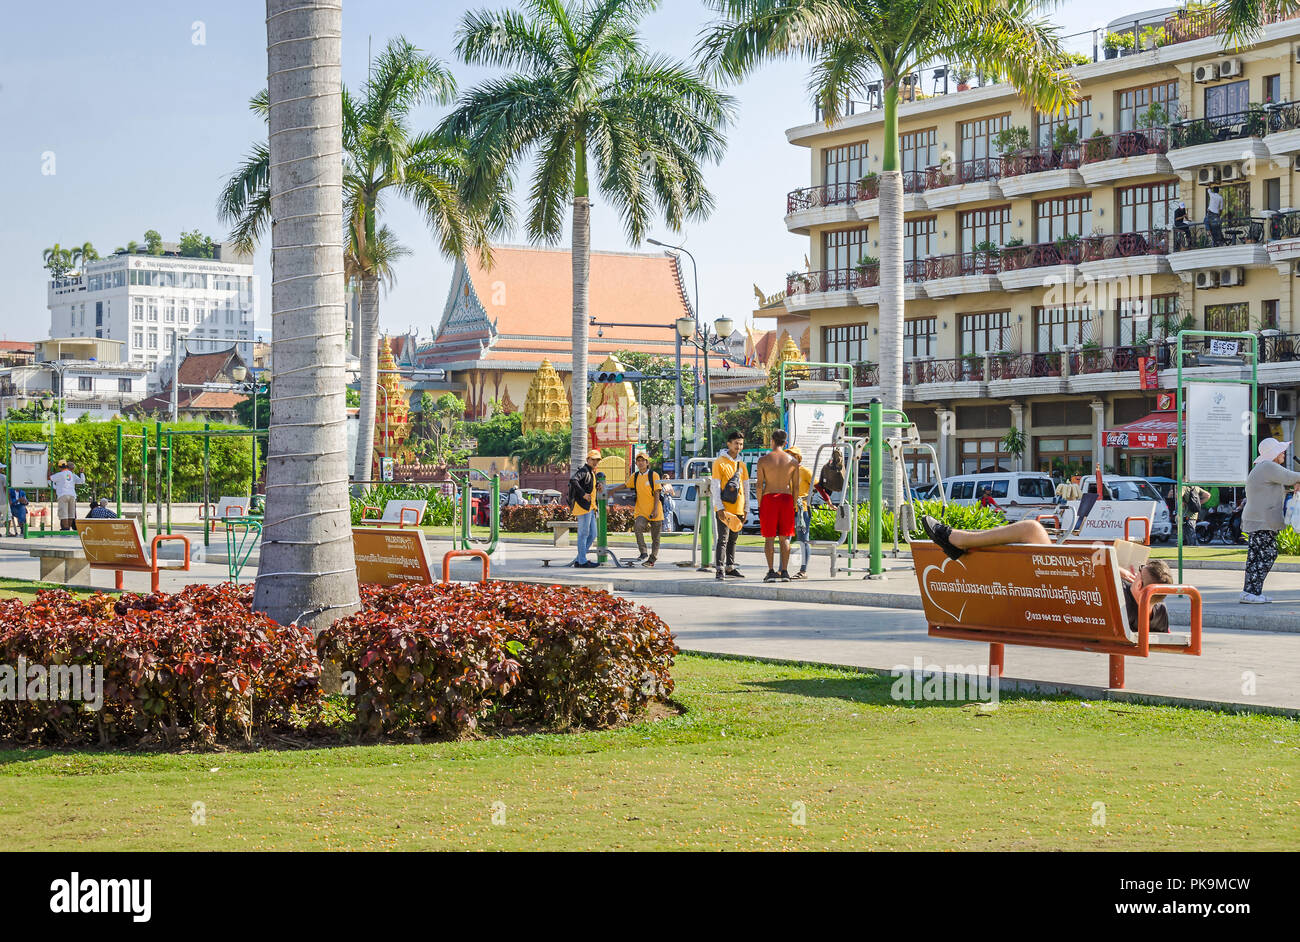 Phnom Penh, Cambodia - April 9, 2018: Preah Sisowath Quay - the boulevard running along the banks of the Mekong and Tonle Sap rivers Stock Photo